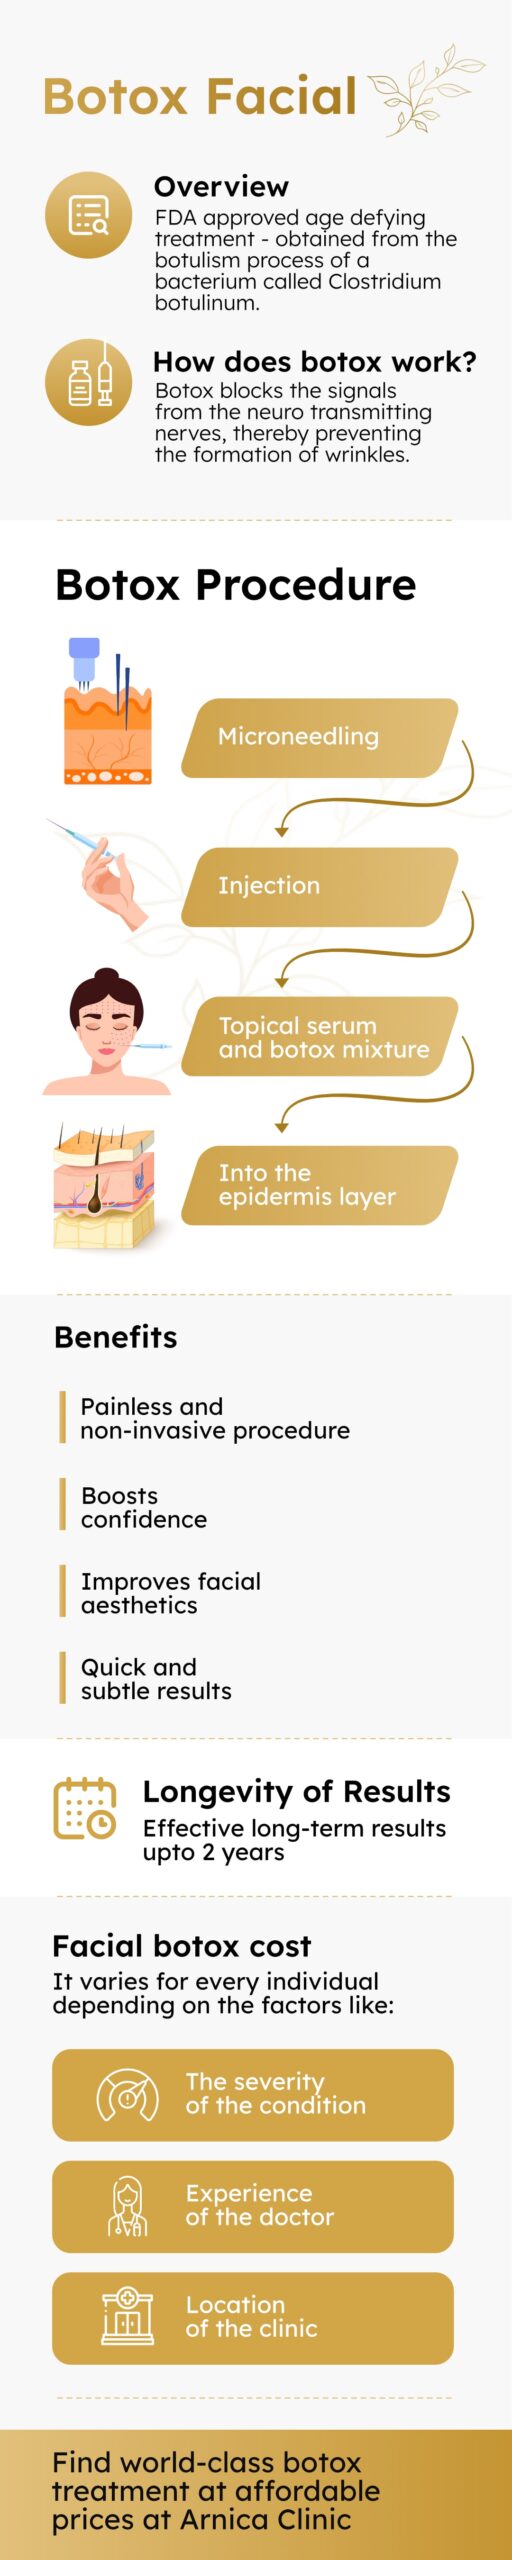 Botox Facial in Pune Infographic (mobile)